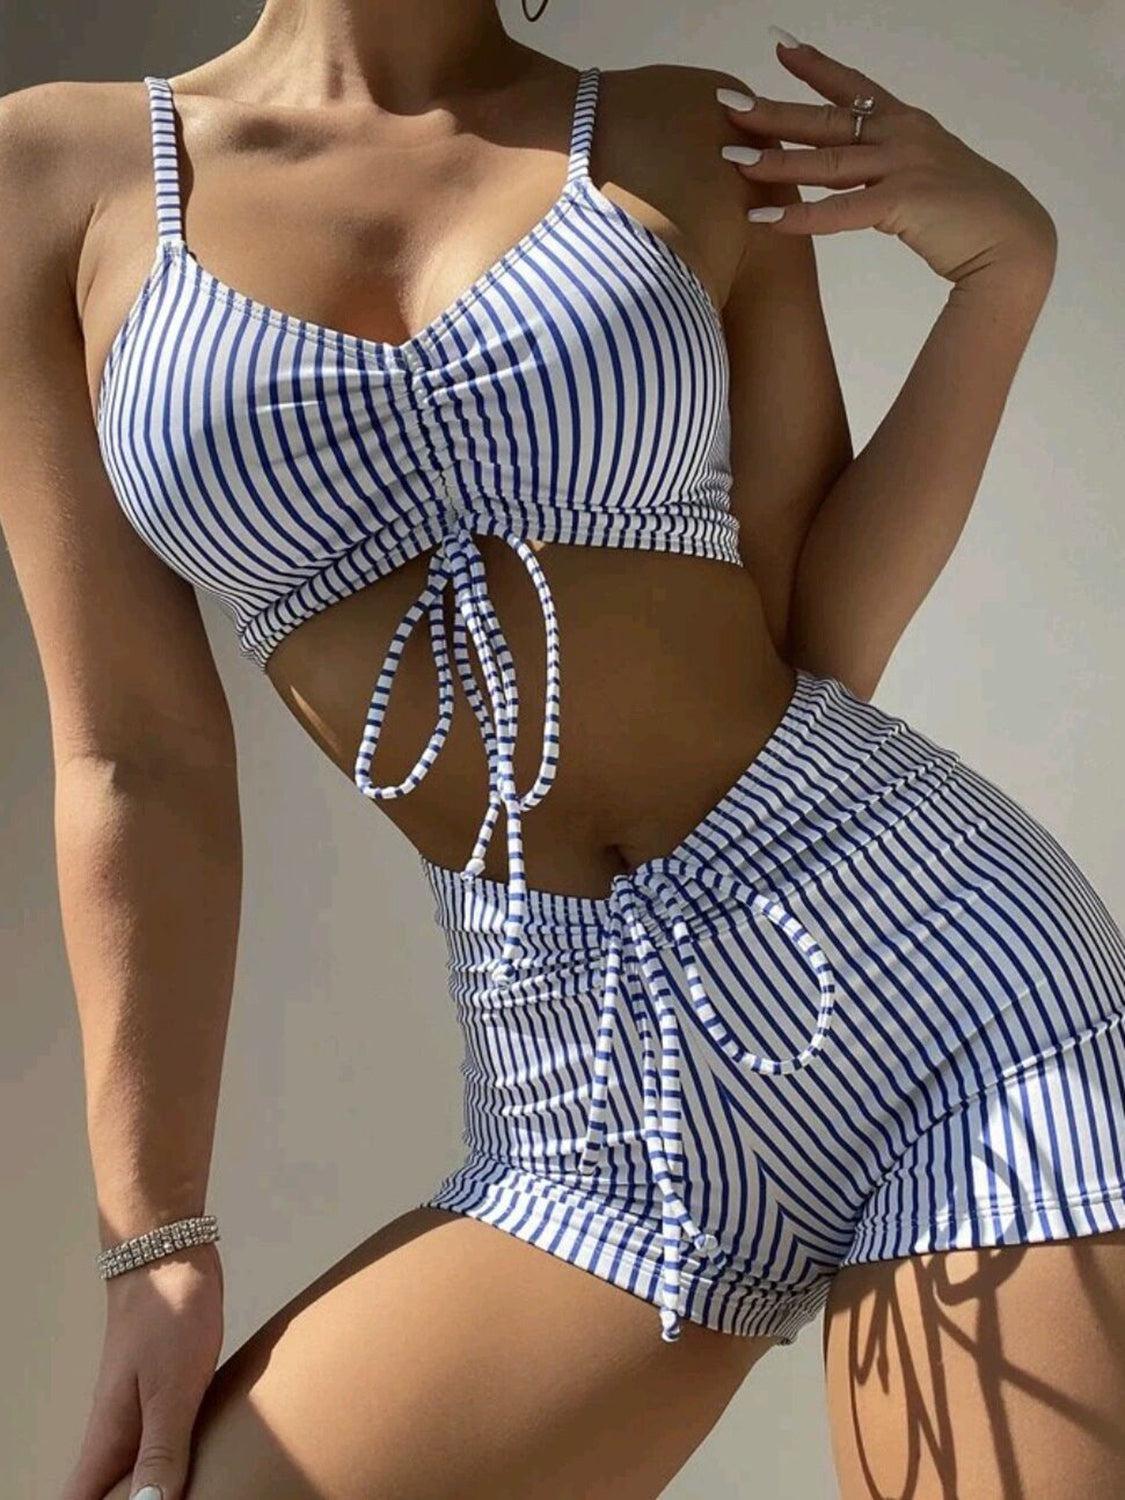 a woman in a blue and white striped bathing suit